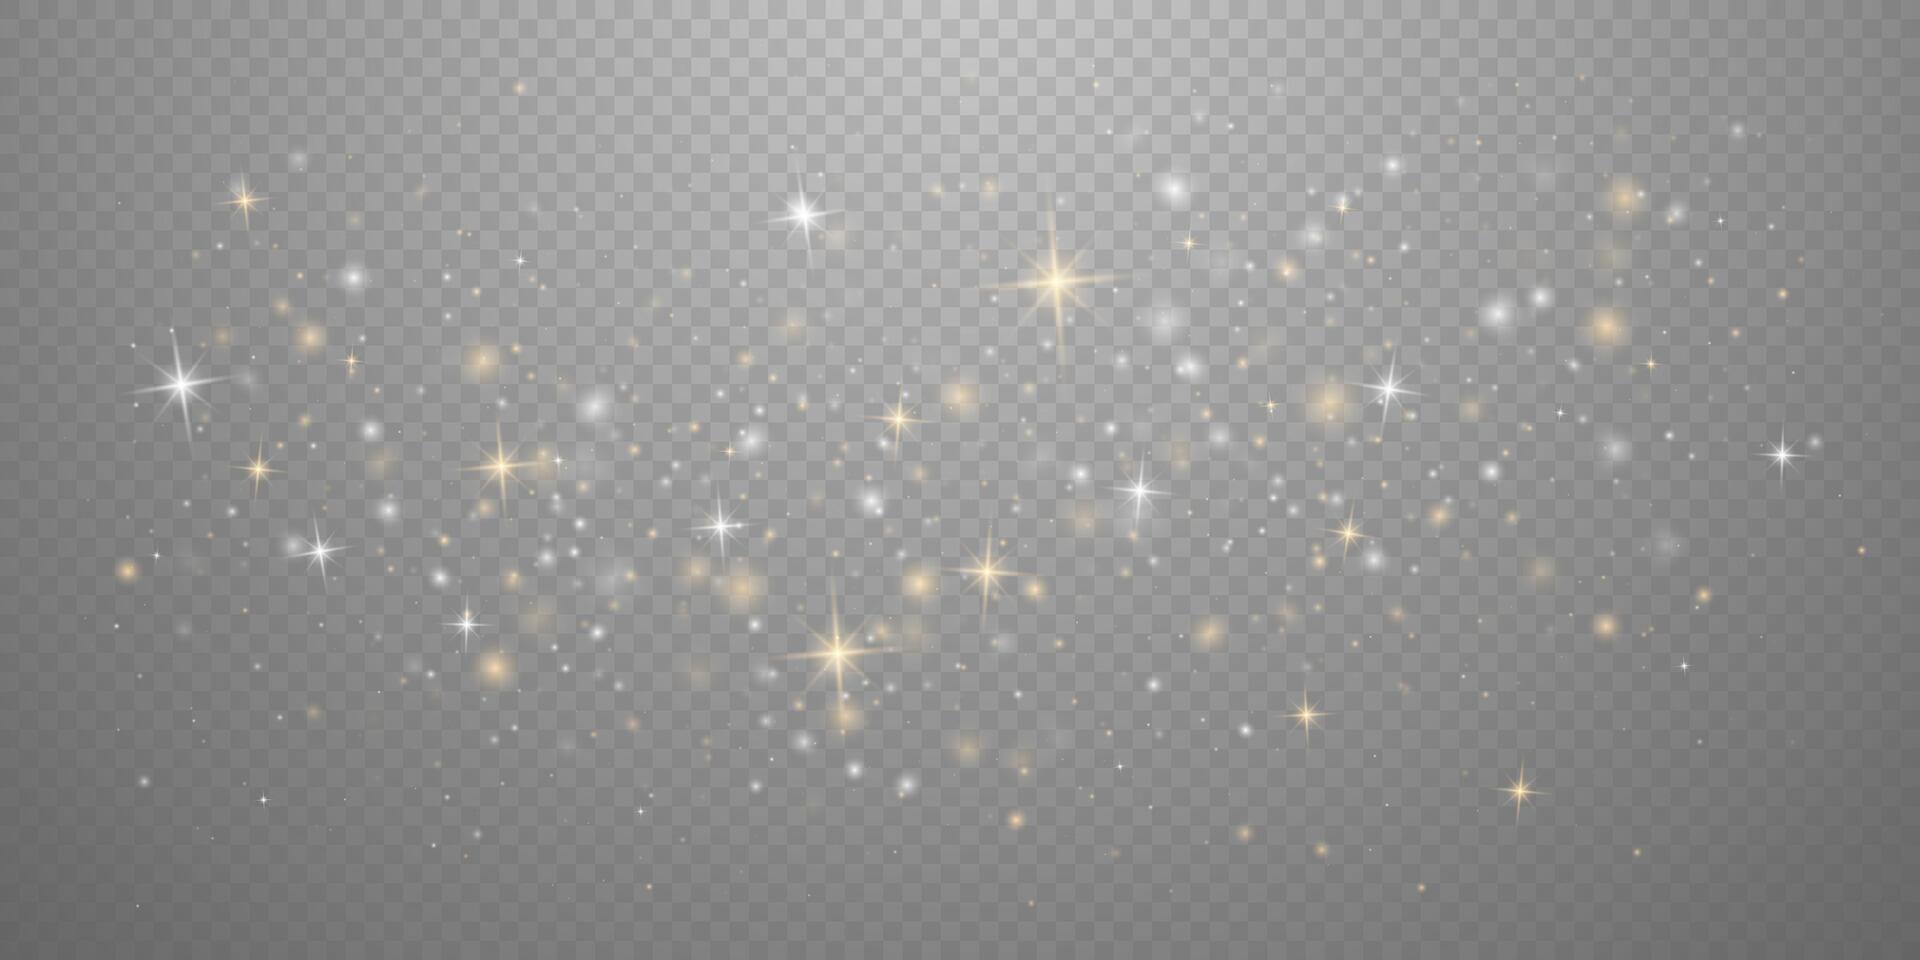 Bright luminous stars and dust. Christmas von Confetti with the light effect of the side for your design. vector